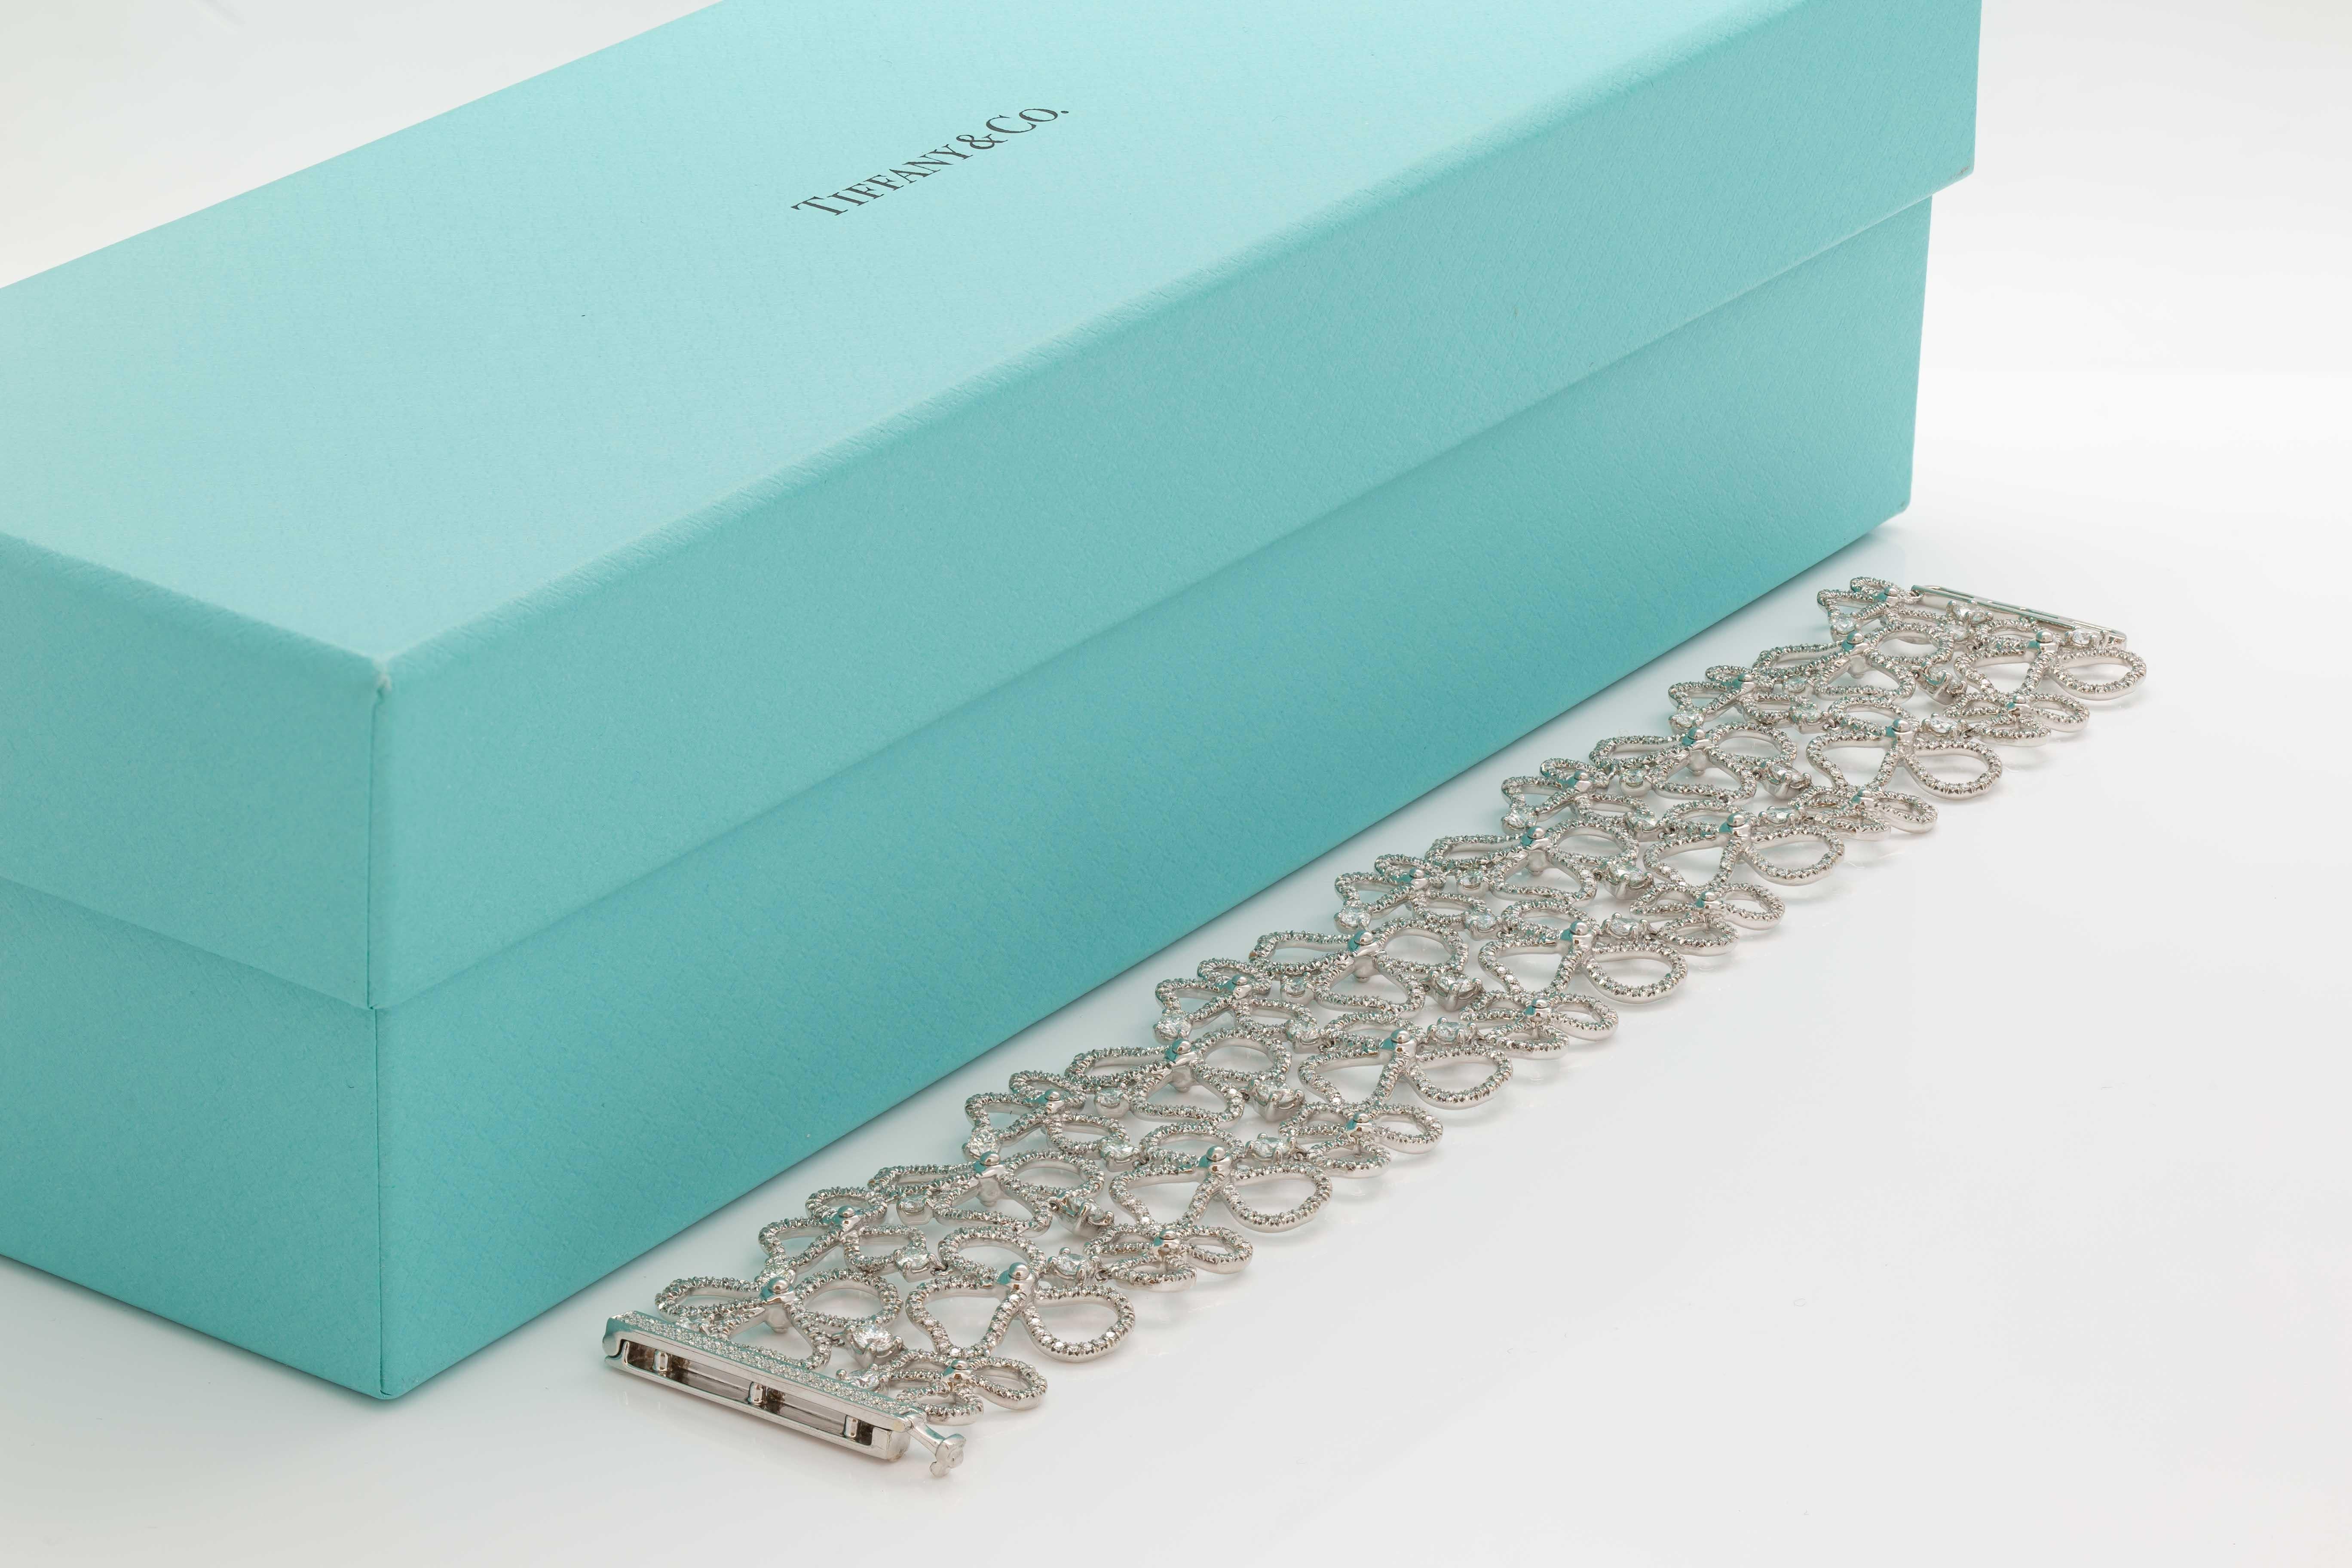 Tiffany & Co. Paper Flowers Bracelet in platinum

Extremely rare piece

Approximately 1600 diamonds totaling around 12 carat

7” long

Comes in original box

Approx retail value: 100,000.00$